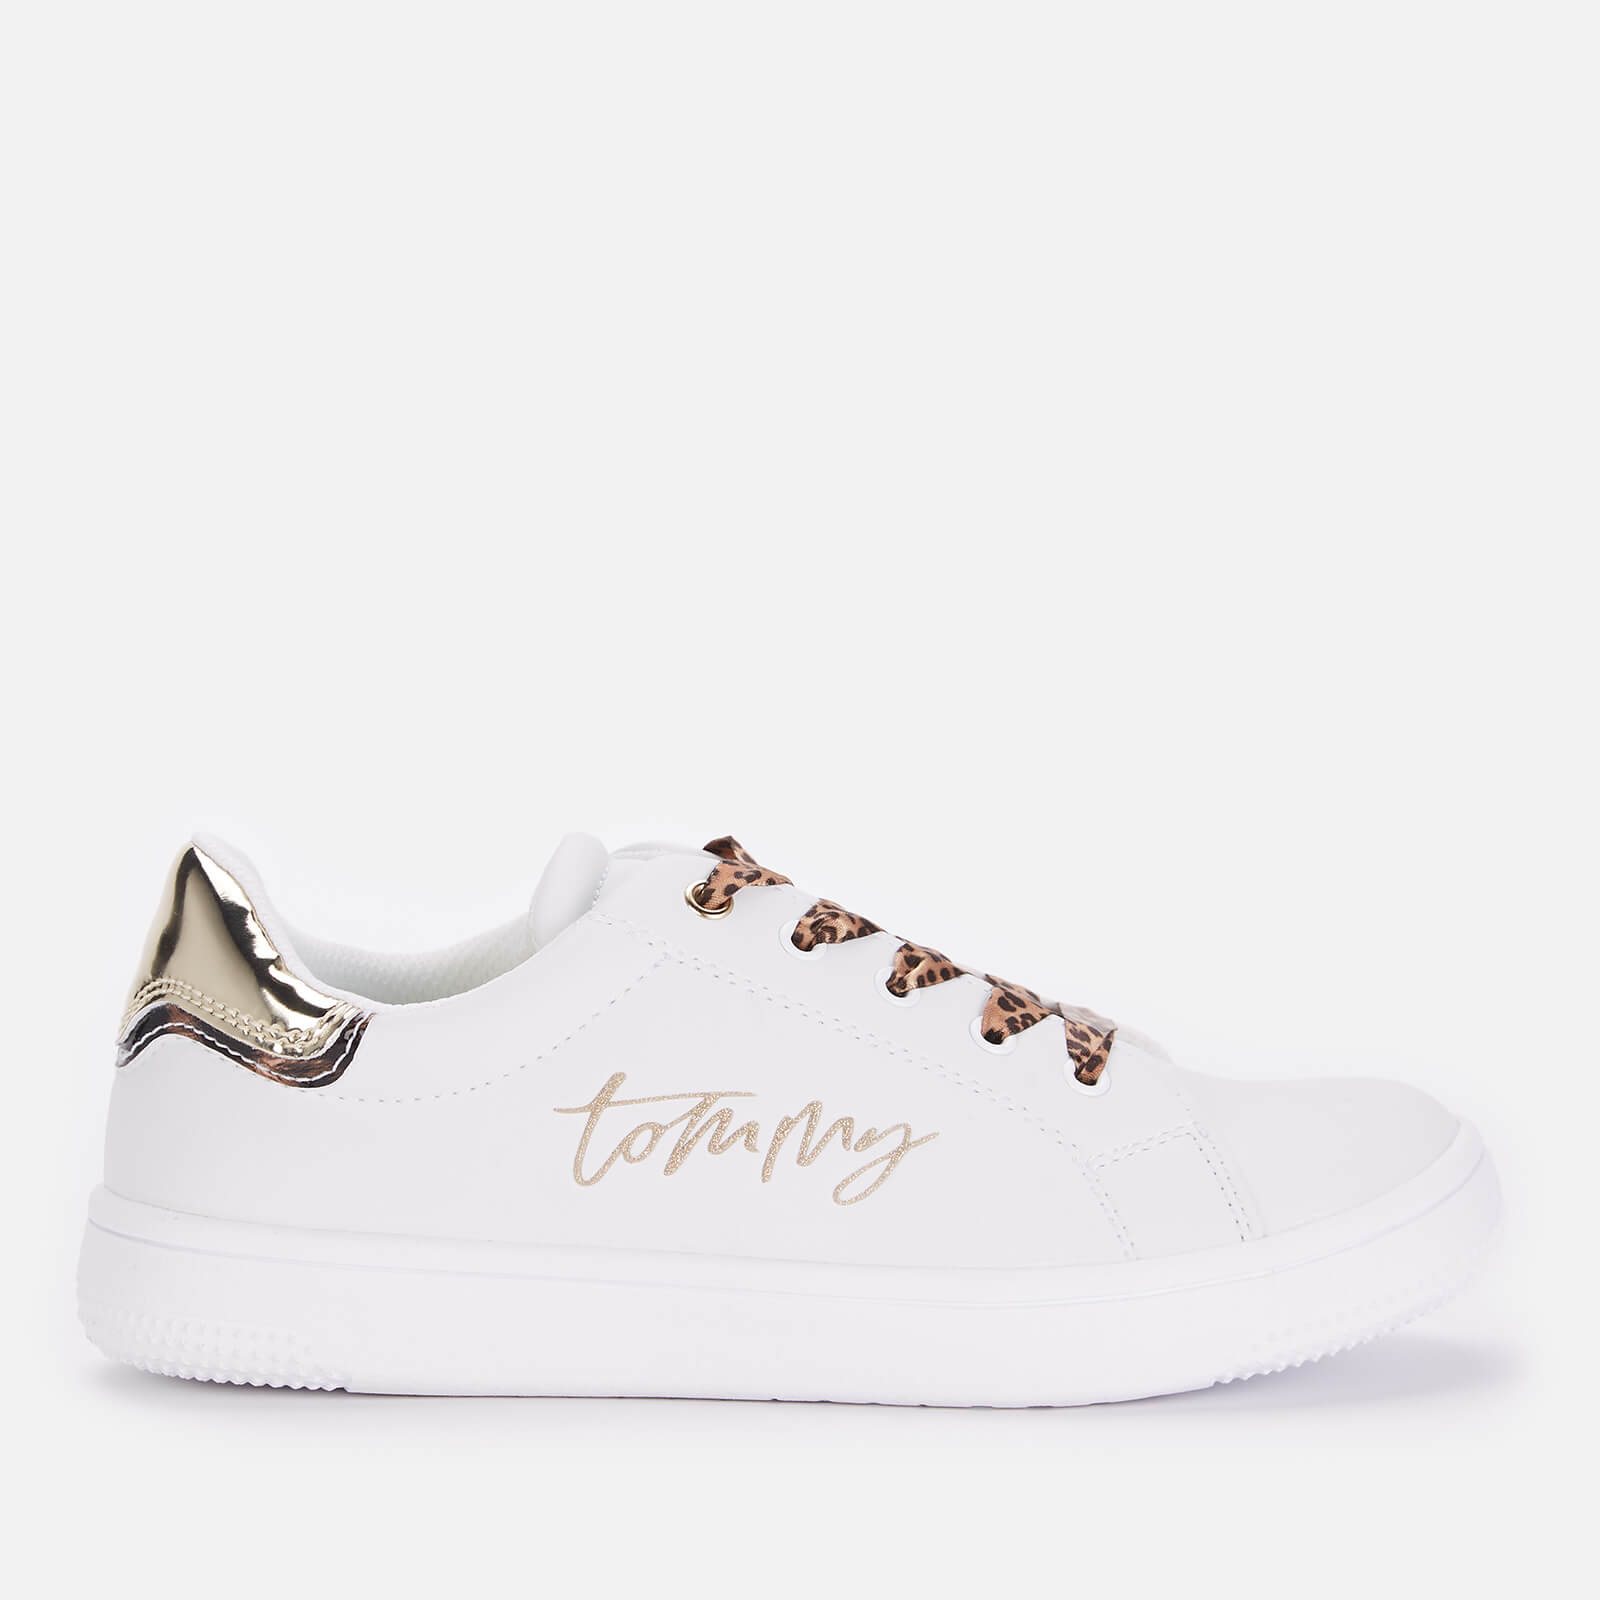 Tommy Hilfiger Girls' Low Cut Lace-Up Sneaker White/Platinum White/Platinum - UK 1 Kids product